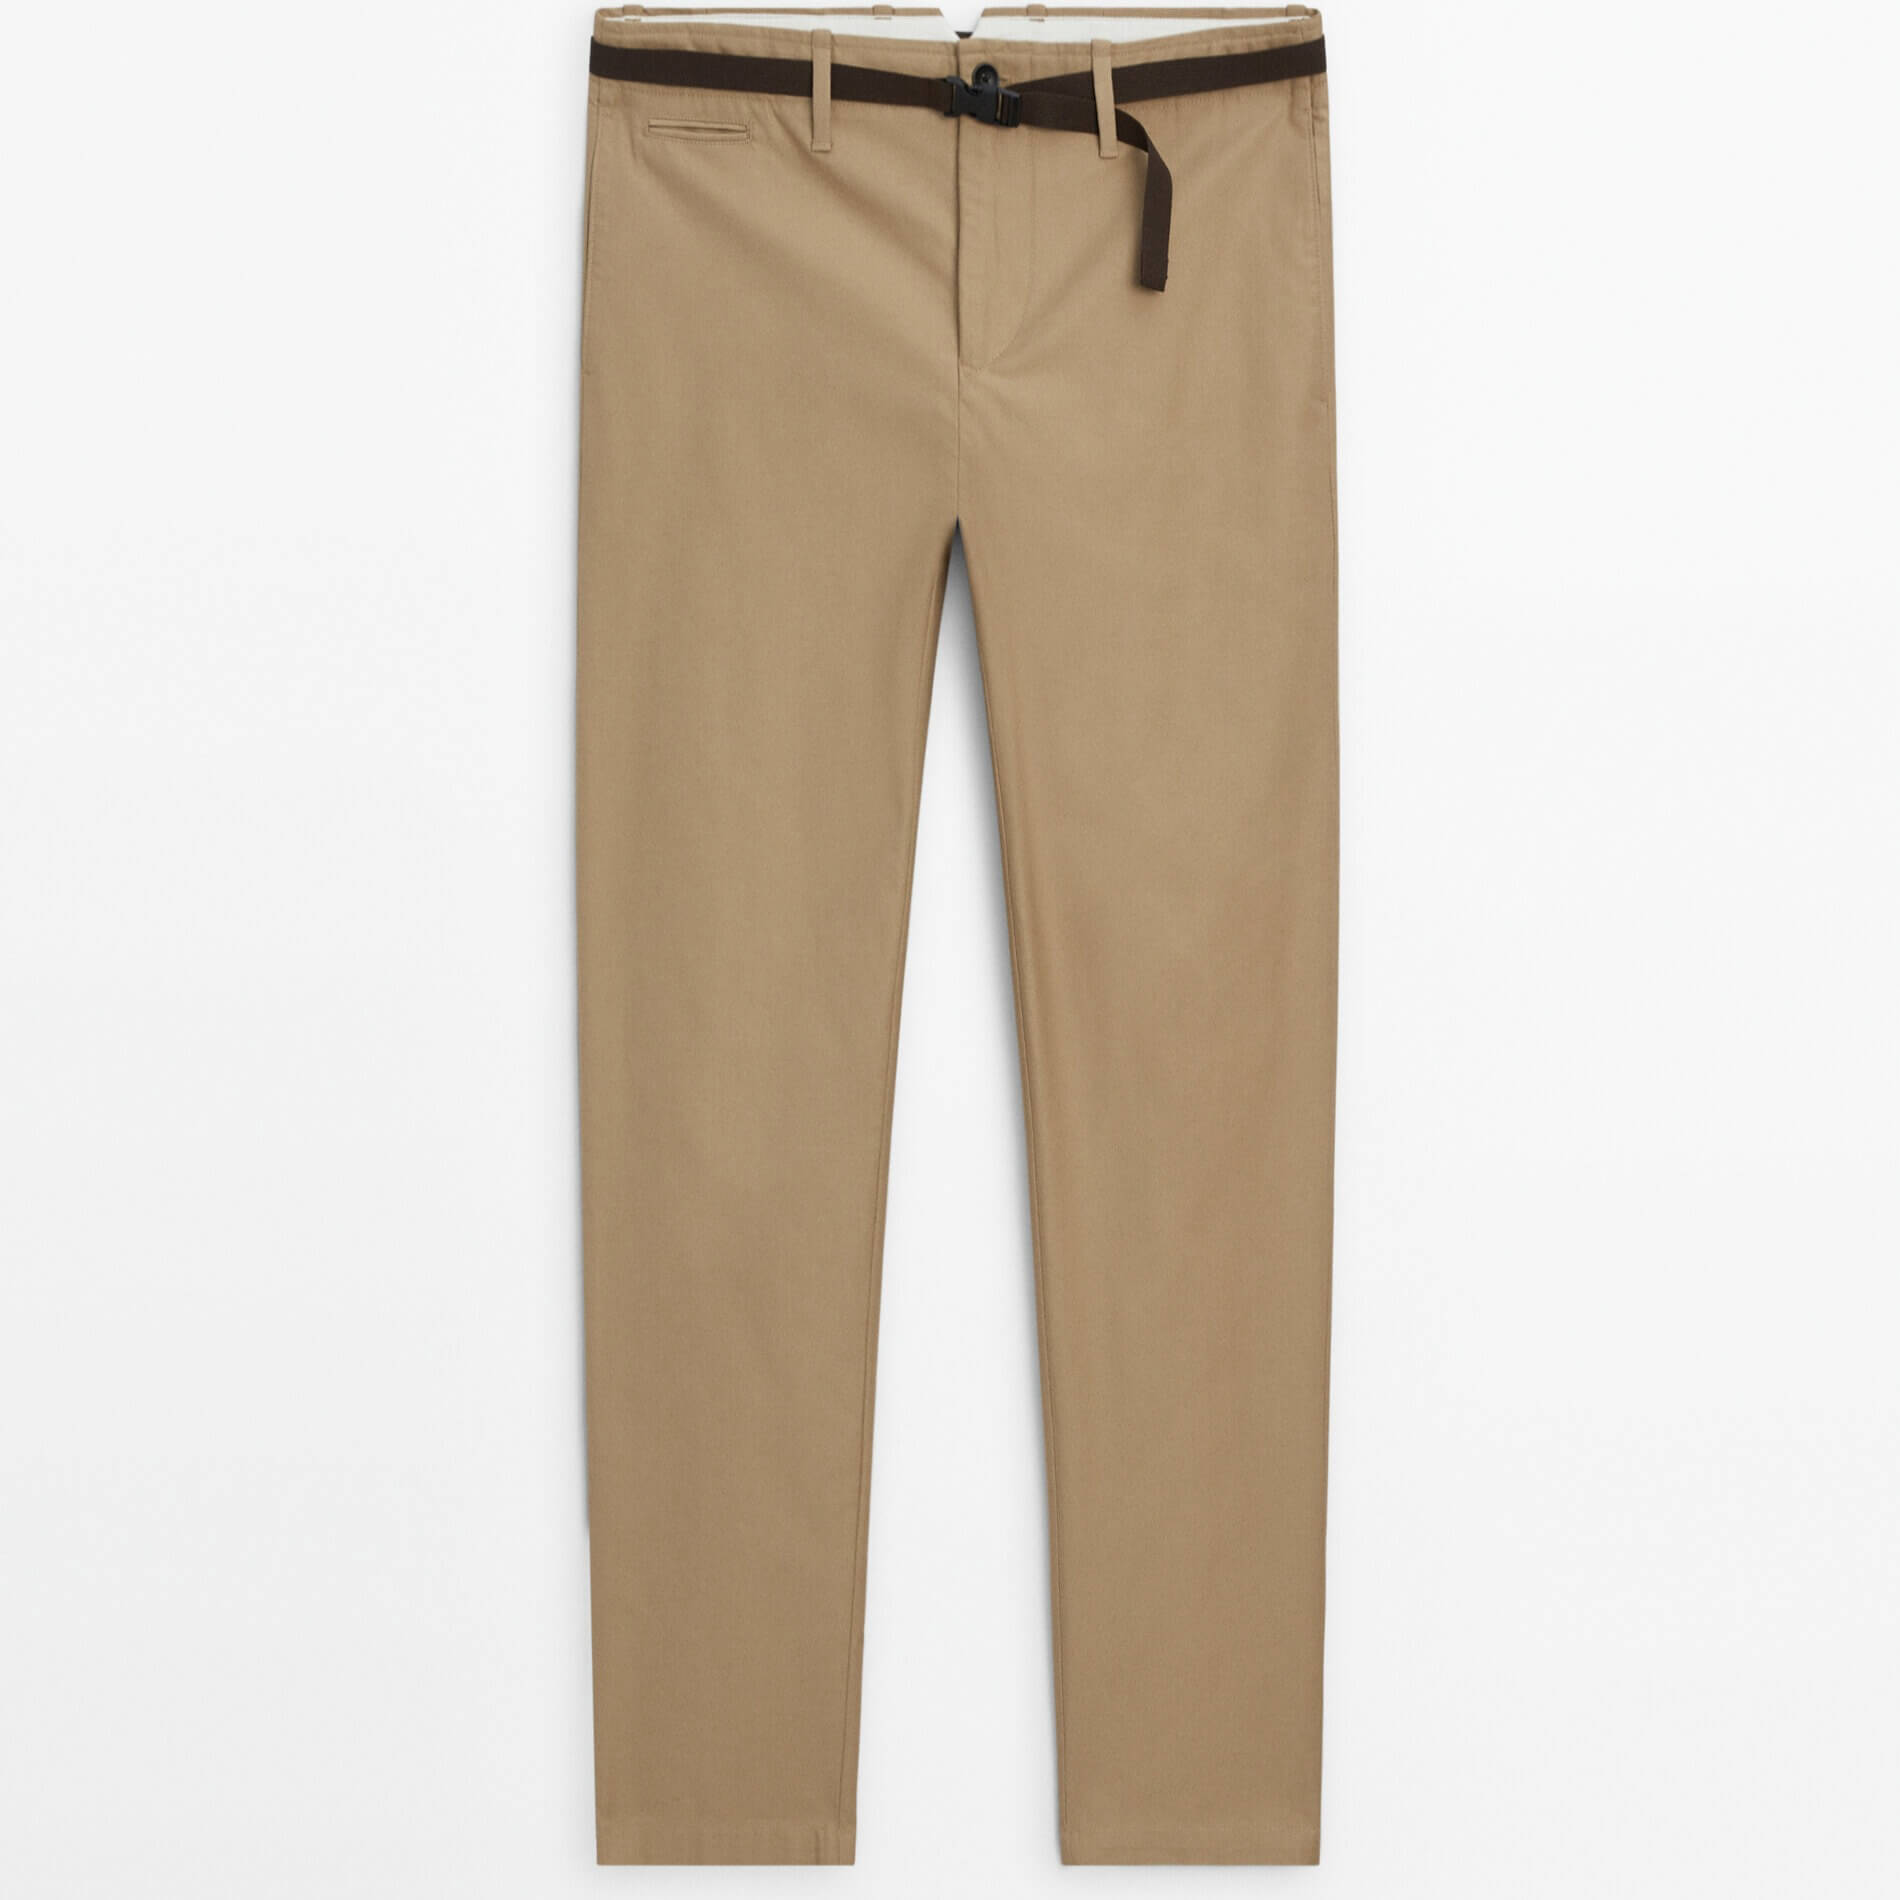 Брюки Massimo Dutti Relaxed Fit Belted Chino, бежевый цена и фото